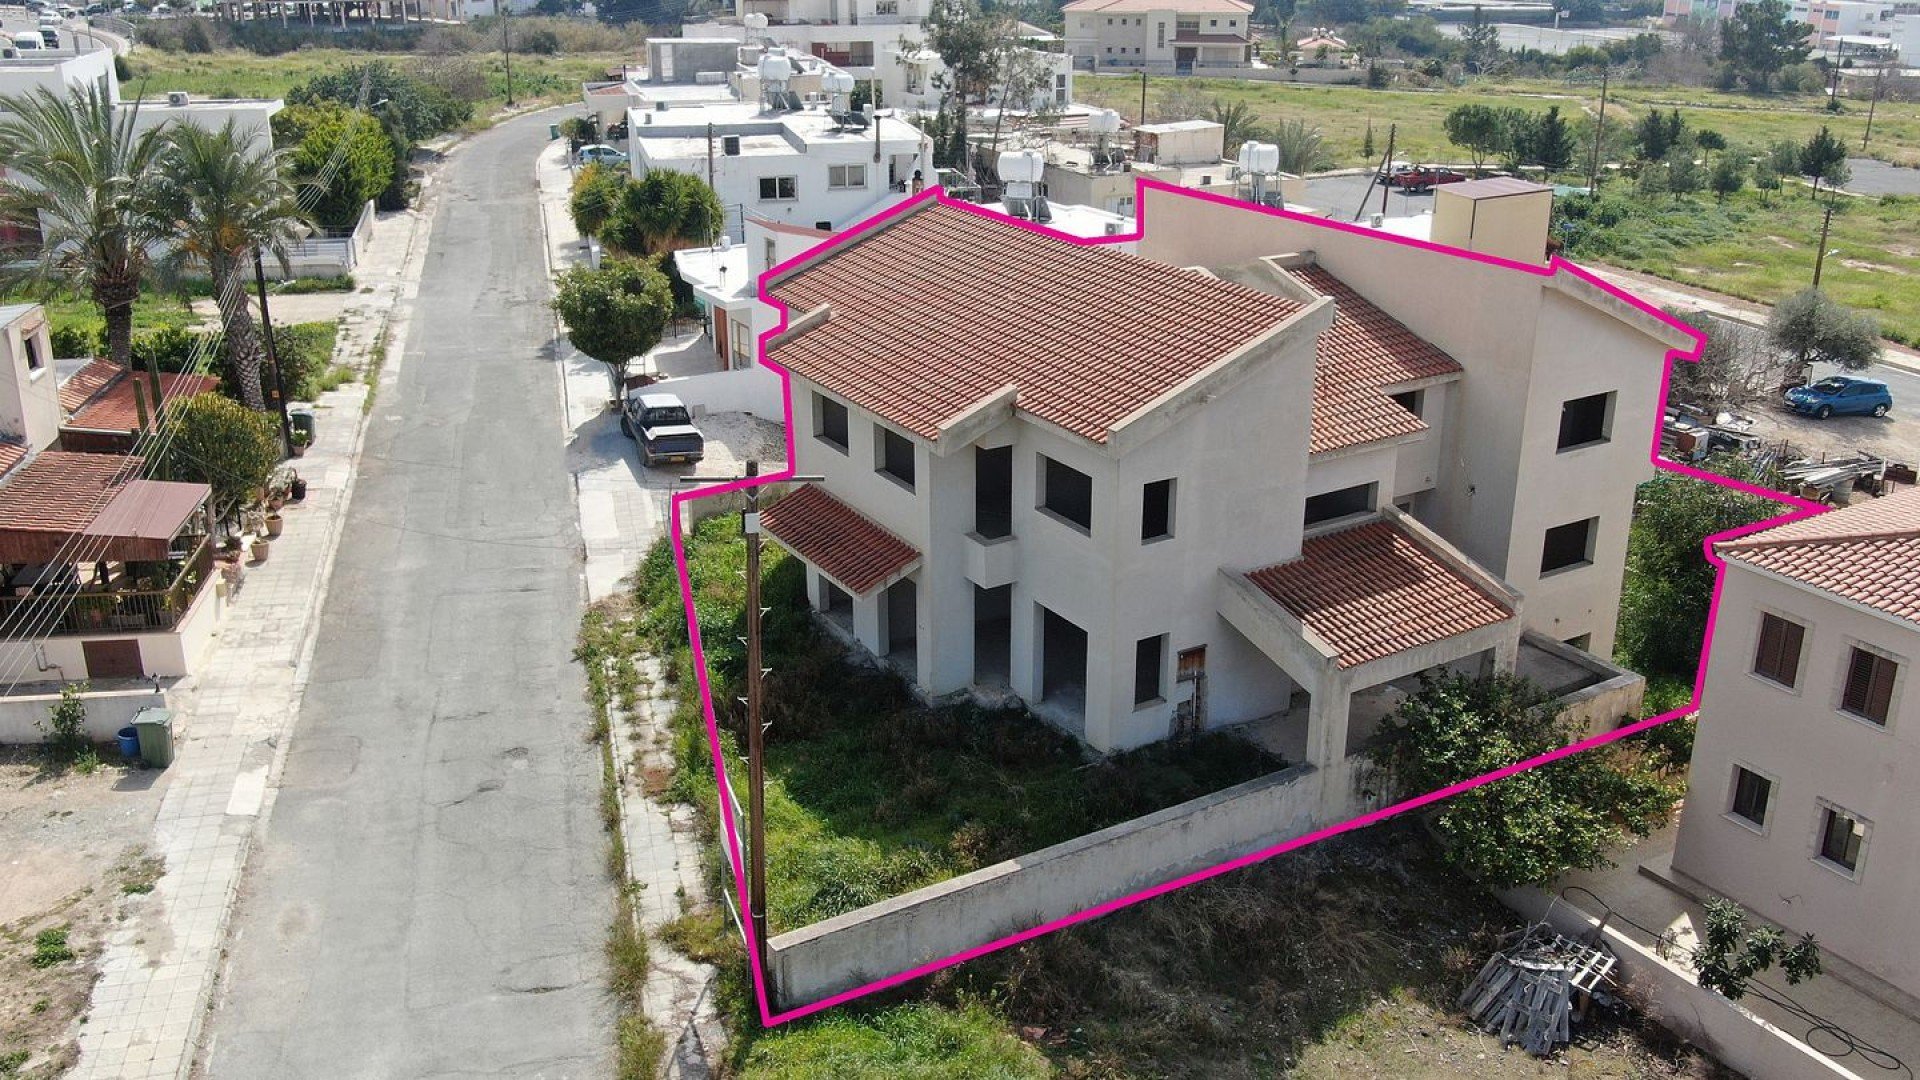 4 Bedroom House for Sale in Paphos – Agios Pavlos